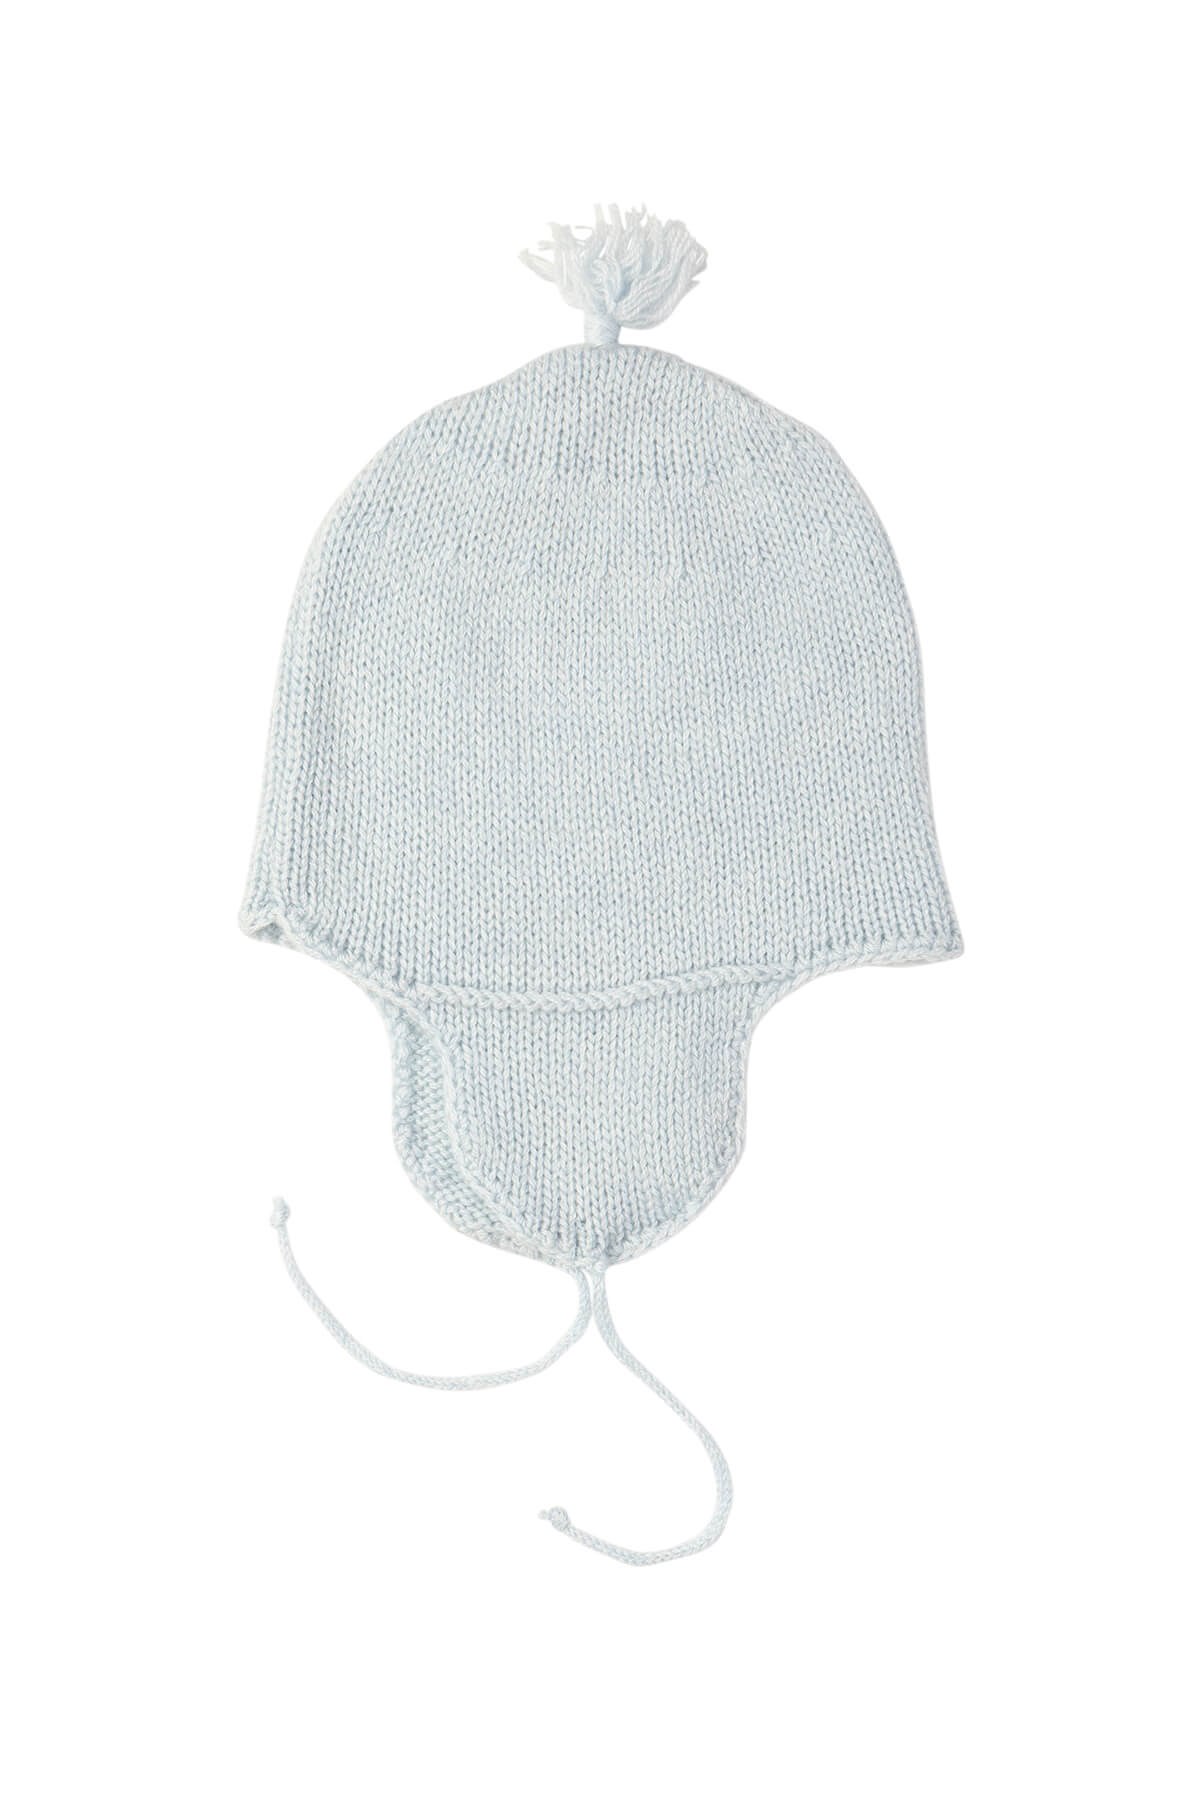 Johnstons of Elgin’s Baby's 1st Cashmere Accessories Gift Set with Powder Blue Cashmere Baby Hat on a white background AW21GIFTSET20C